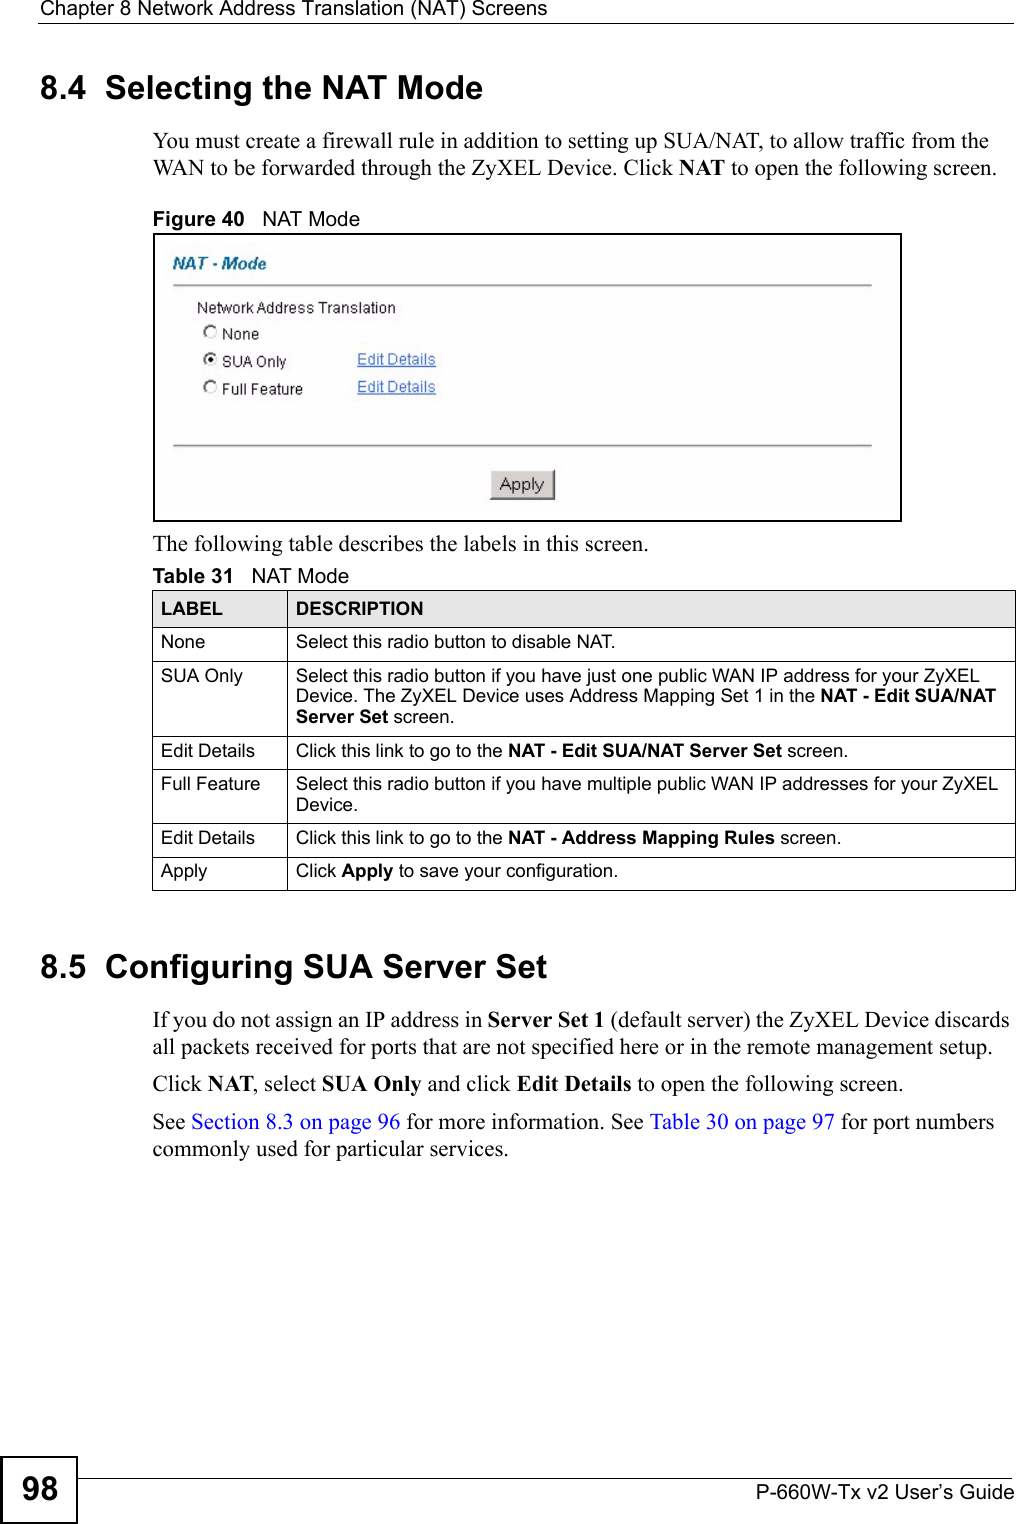 Chapter 8 Network Address Translation (NAT) ScreensP-660W-Tx v2 User’s Guide988.4  Selecting the NAT Mode You must create a firewall rule in addition to setting up SUA/NAT, to allow traffic from the WAN to be forwarded through the ZyXEL Device. Click NAT to open the following screen. Figure 40   NAT ModeThe following table describes the labels in this screen. 8.5  Configuring SUA Server Set If you do not assign an IP address in Server Set 1 (default server) the ZyXEL Device discards all packets received for ports that are not specified here or in the remote management setup.Click NAT, select SUA Only and click Edit Details to open the following screen. See Section 8.3 on page 96 for more information. See Table 30 on page 97 for port numbers commonly used for particular services. Table 31   NAT ModeLABEL DESCRIPTIONNone Select this radio button to disable NAT.SUA Only Select this radio button if you have just one public WAN IP address for your ZyXEL Device. The ZyXEL Device uses Address Mapping Set 1 in the NAT - Edit SUA/NAT Server Set screen. Edit Details Click this link to go to the NAT - Edit SUA/NAT Server Set screen. Full Feature  Select this radio button if you have multiple public WAN IP addresses for your ZyXEL Device. Edit Details Click this link to go to the NAT - Address Mapping Rules screen. Apply Click Apply to save your configuration.